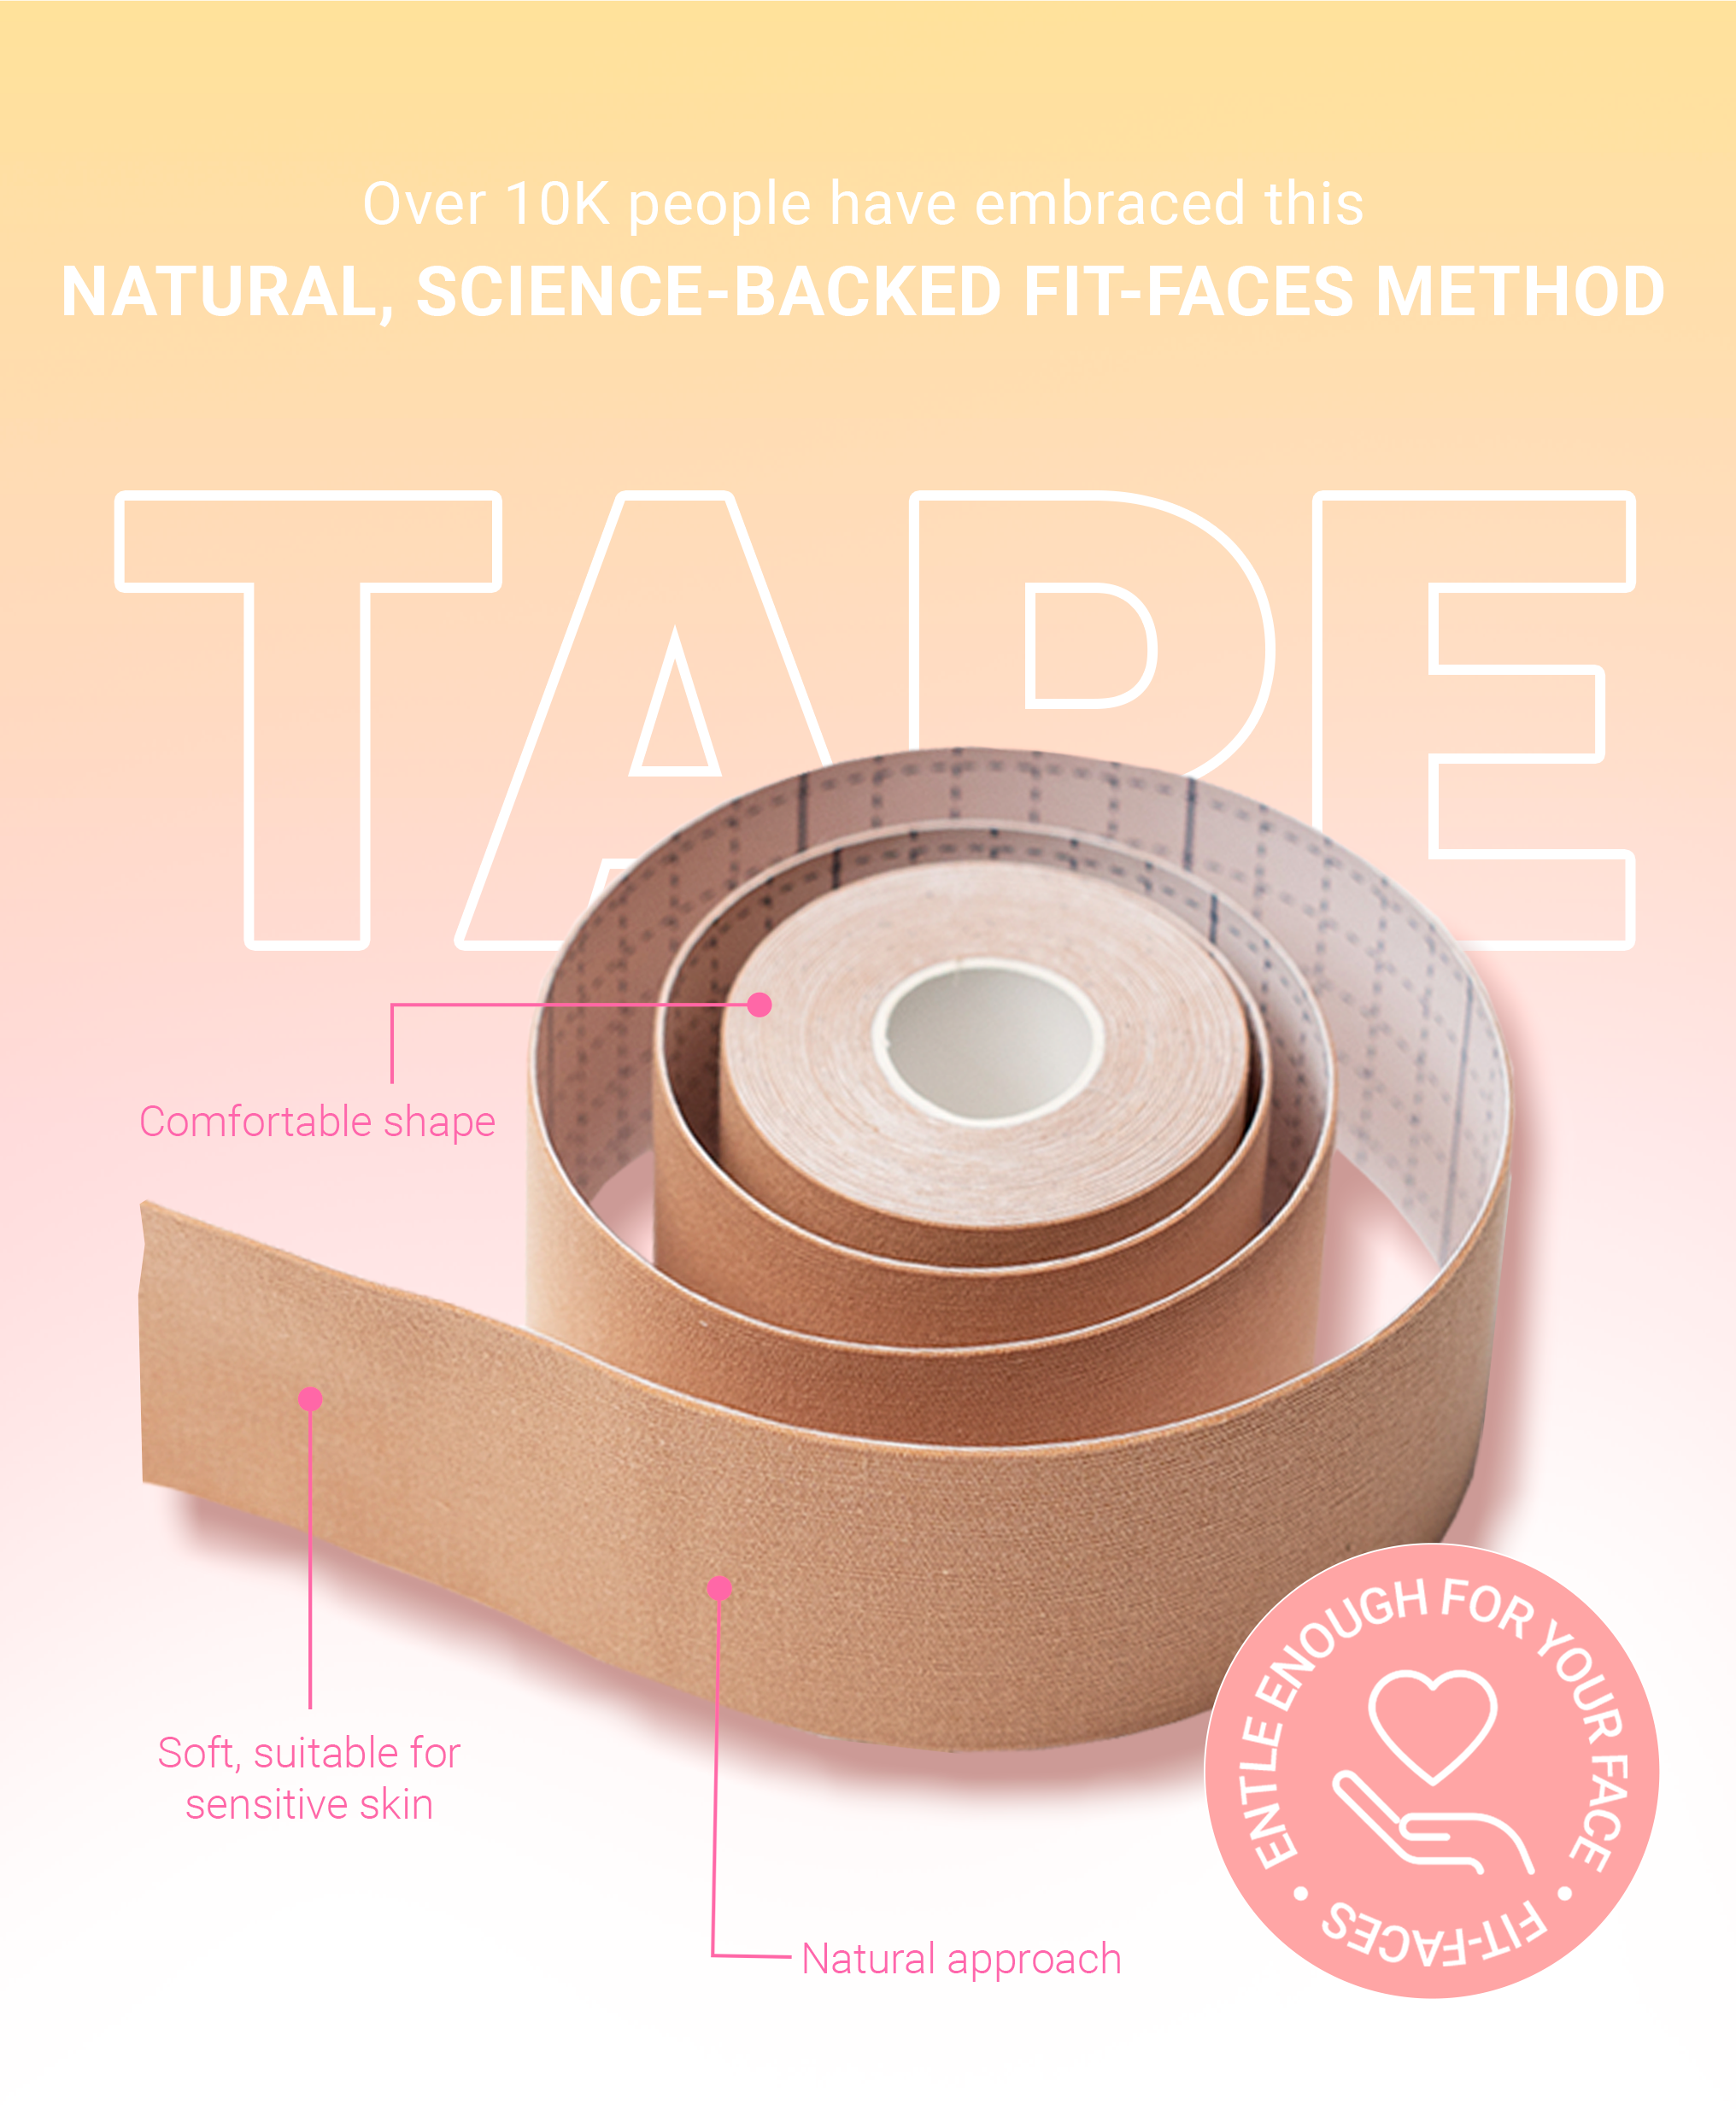 FIT-FACES FACIAL KINESIO TAPE – GOODDESS LTD